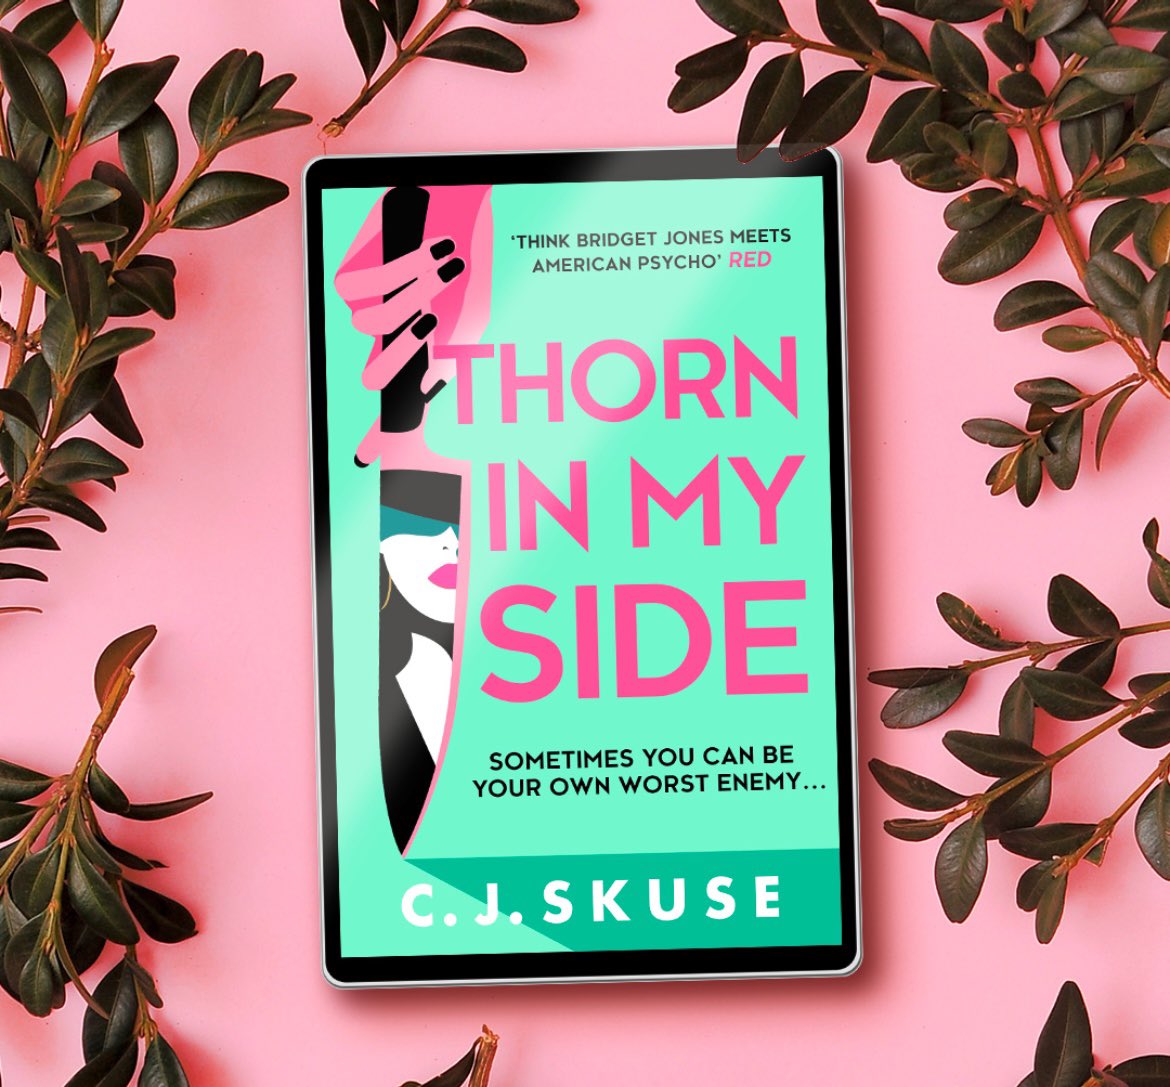 Sweetpea book 4 ‘Thorn in my Side’ is out tomorrow in the UK on ebook and audio. You can grab a copy via this link: amazon.co.uk/gp/aw/d/B0CCKC… Paperback out January 4th. Signed copies available via @brendon_books or @TeaLeaves_Reads #sweetpea #crimefiction #blackcomedy